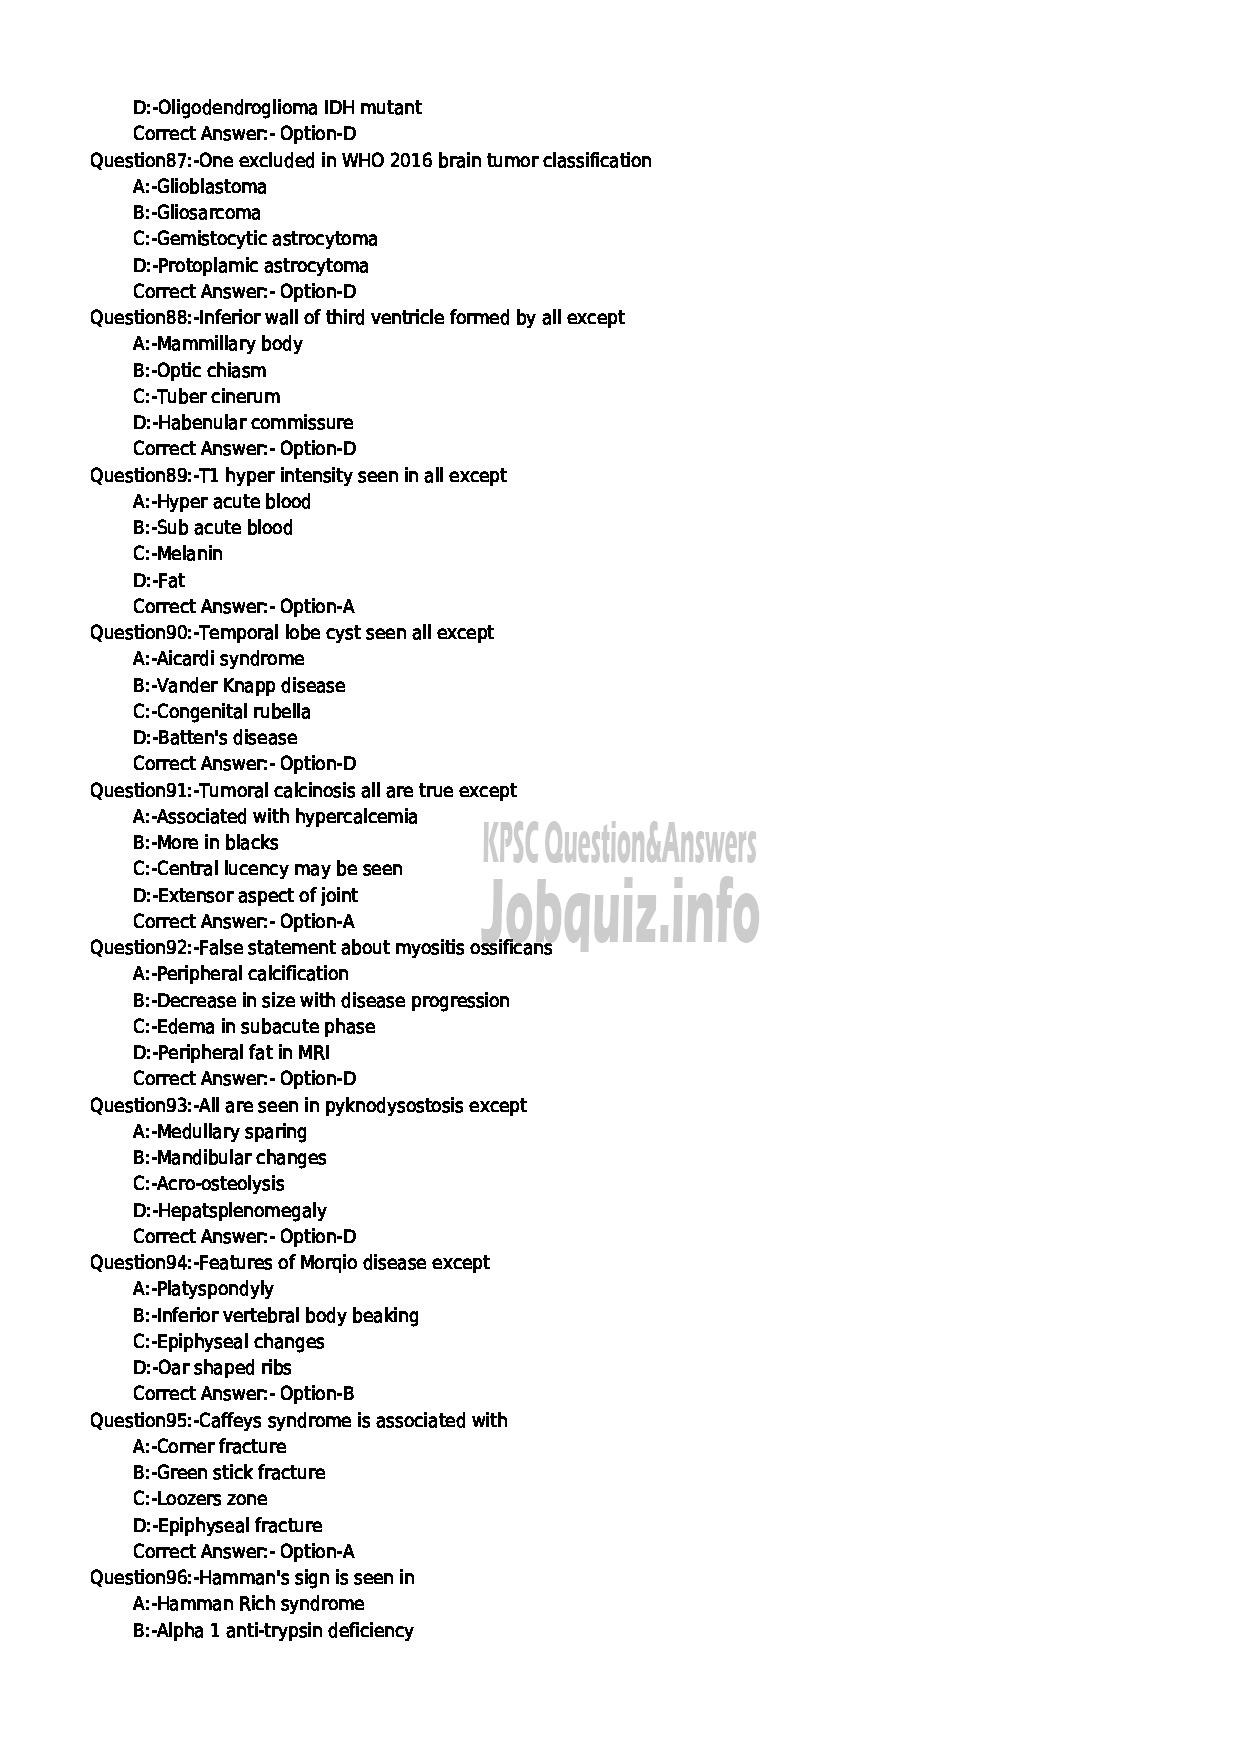 Kerala PSC Question Paper - SENIOR LECTURER IN RADIODIAGNOSIS NCA MEDICAL EDUCATION-10